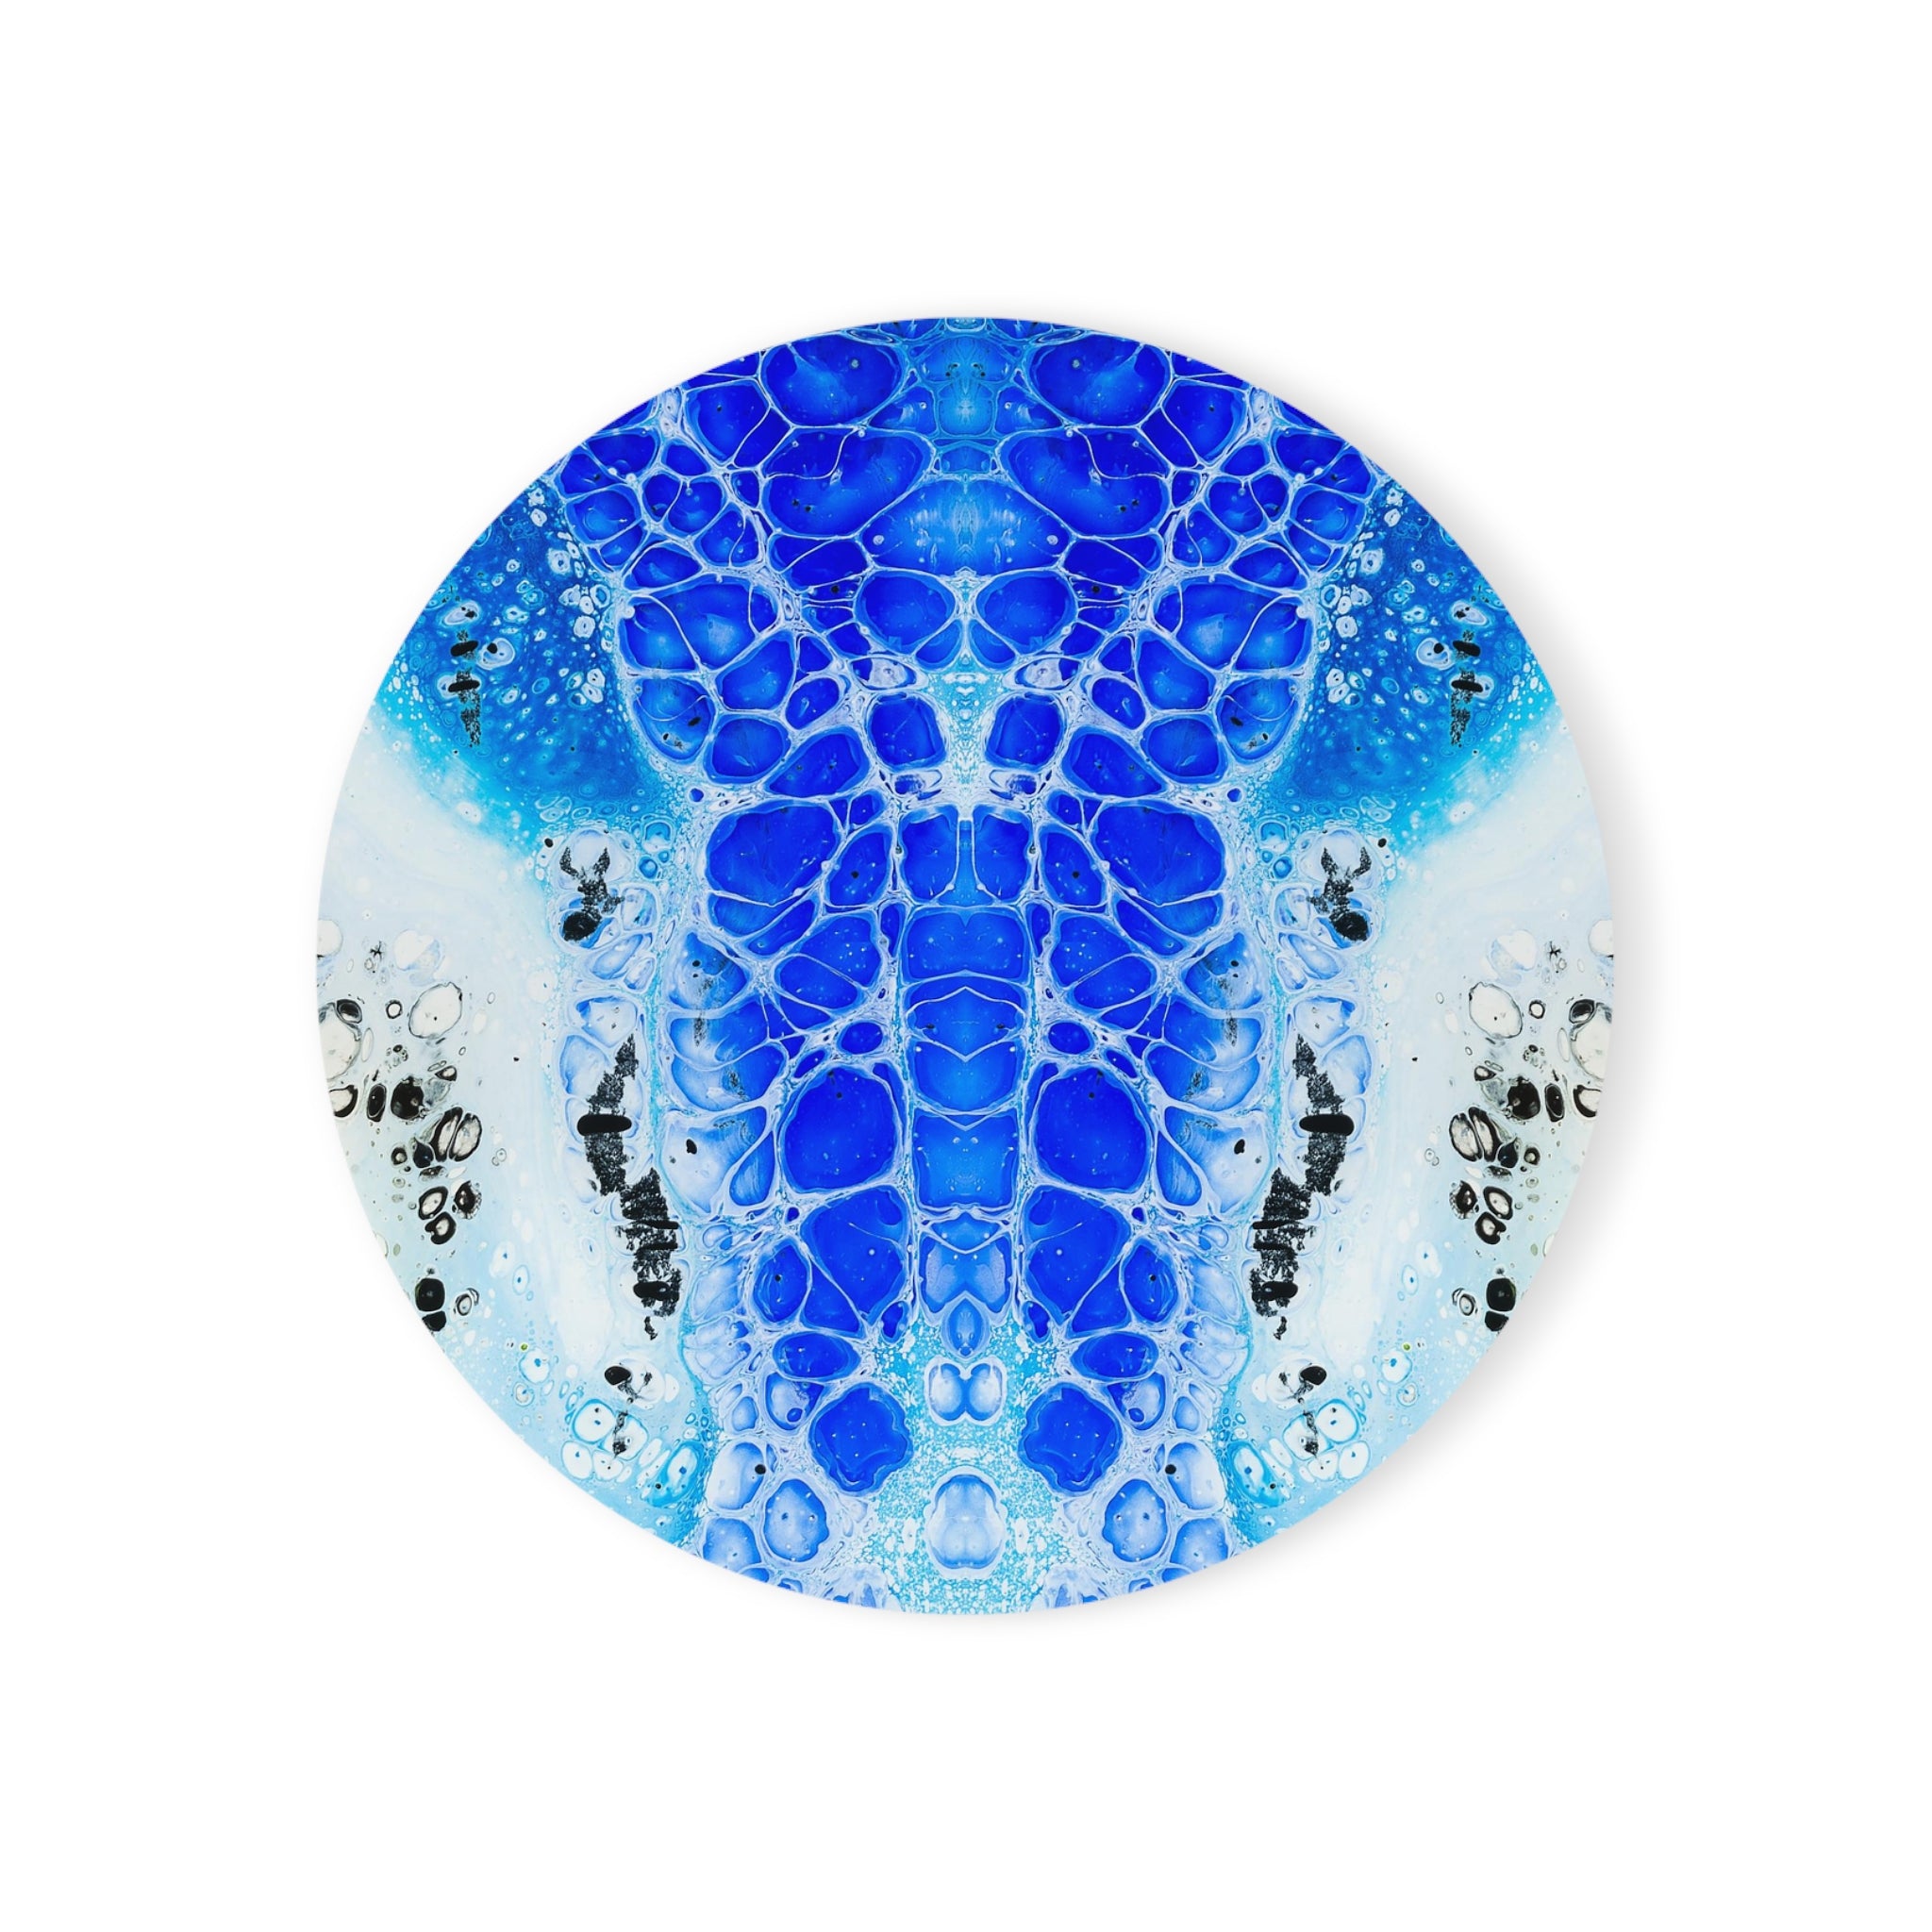 Cameron Creations - Cellonious Beach - Stylish Coffee Coaster - Circle Front